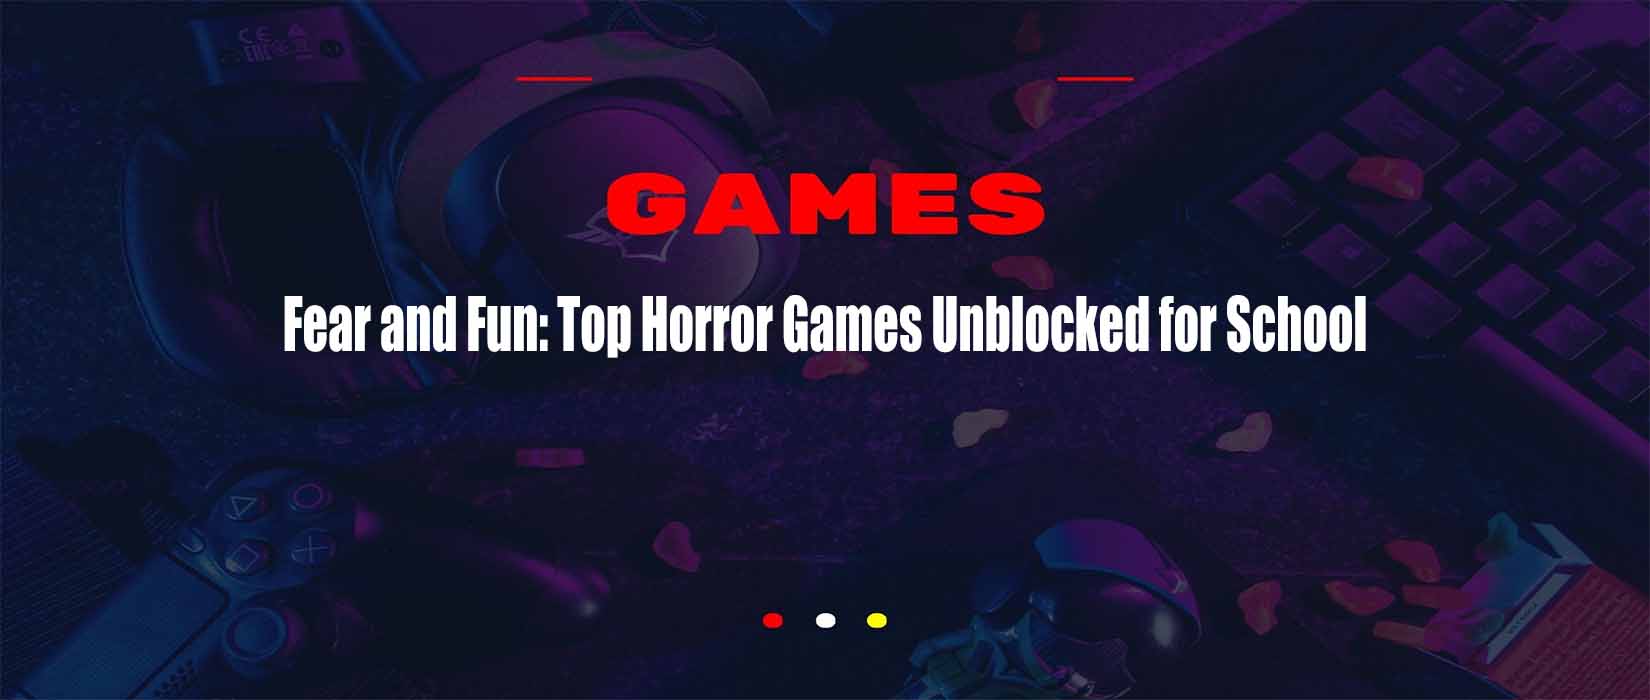 Fear and Fun: Top Horror Games Unblocked for School